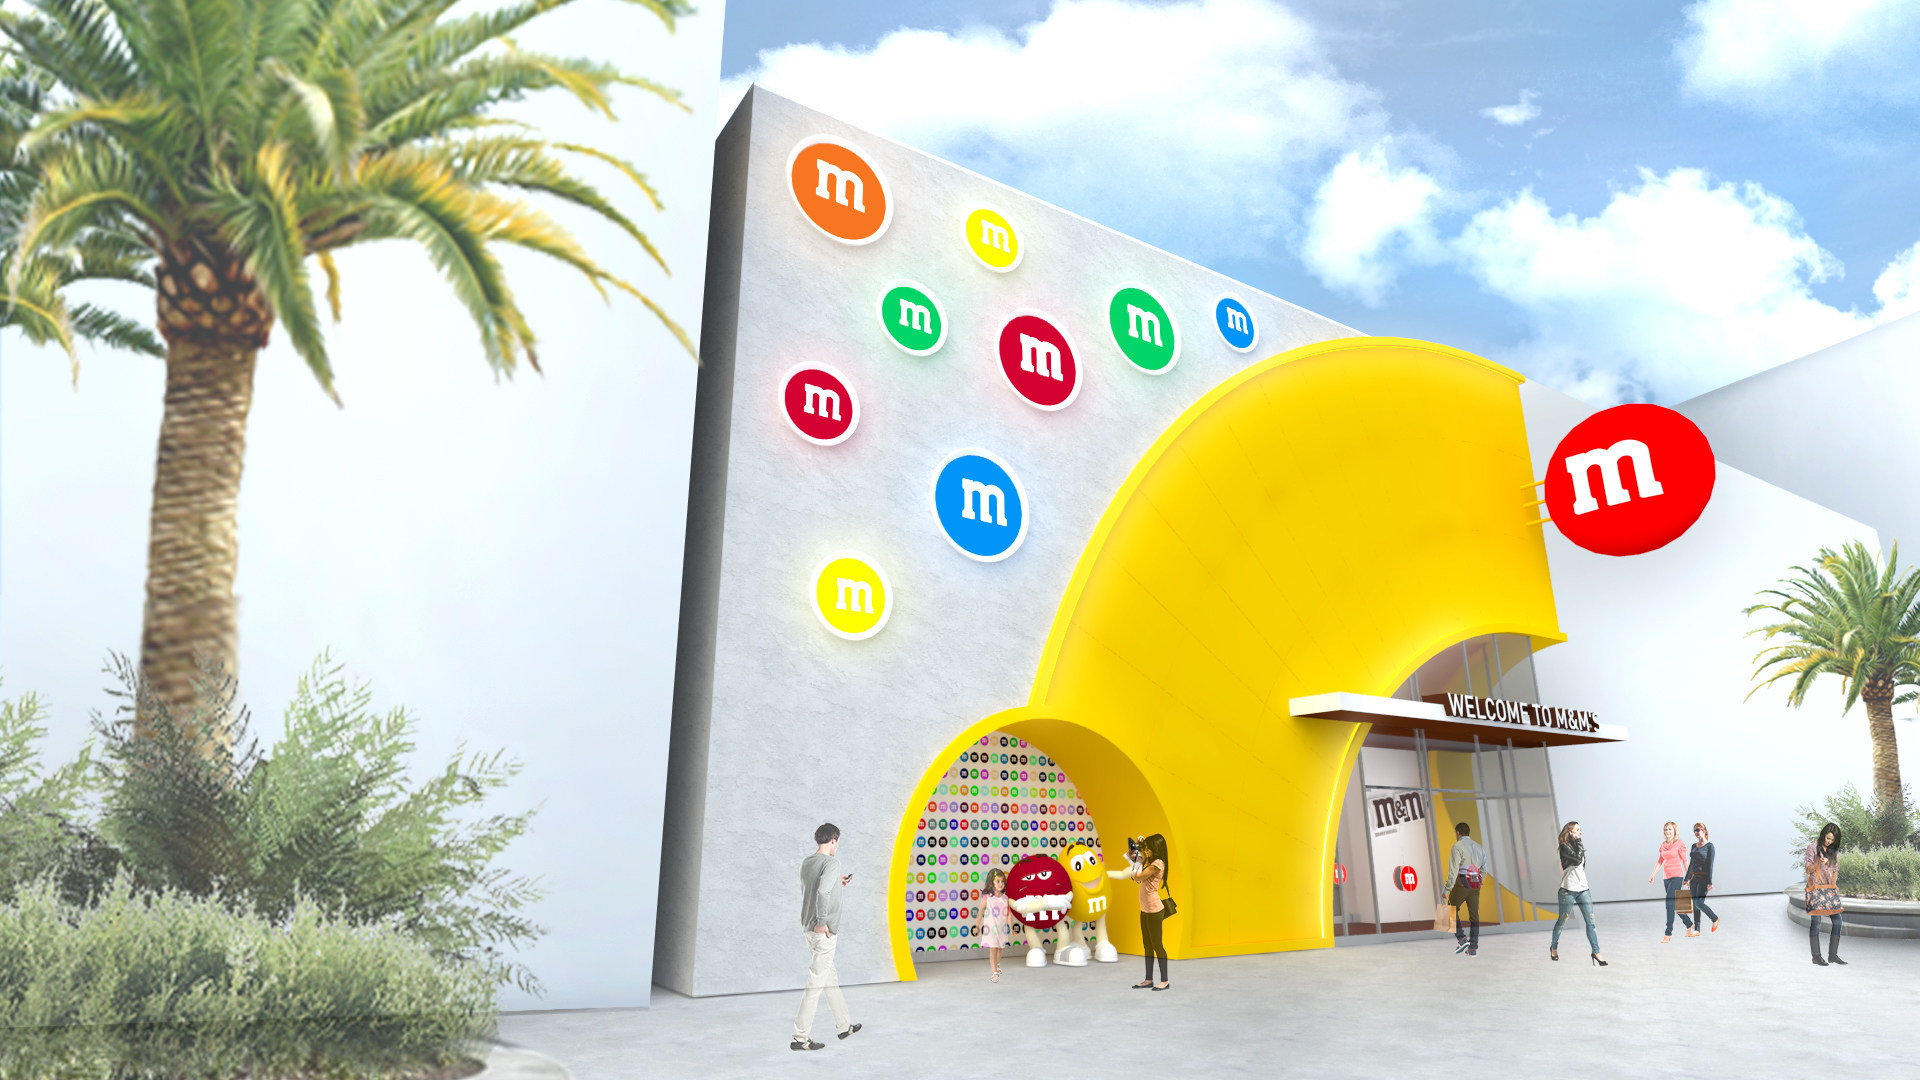 How the M&M's Store Immerses Shoppers In Colors And Joy 10/19/2022